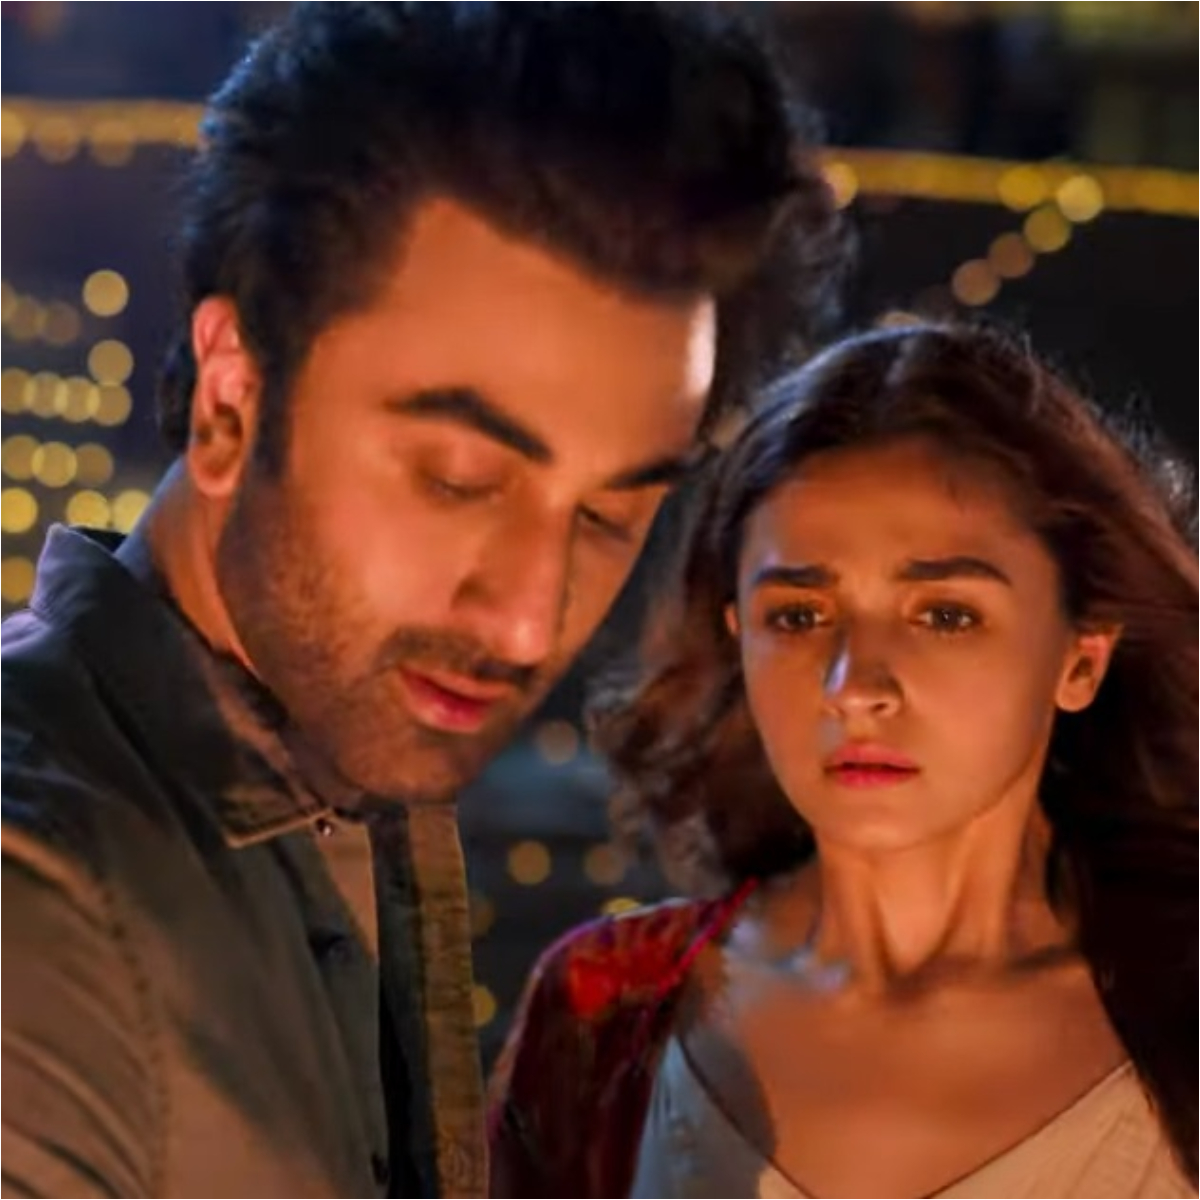 Advance Booking Report: Brahmastra sells 1.30 lakh tickets; Competing with TZH, Sanju, Sultan &amp; Dangal